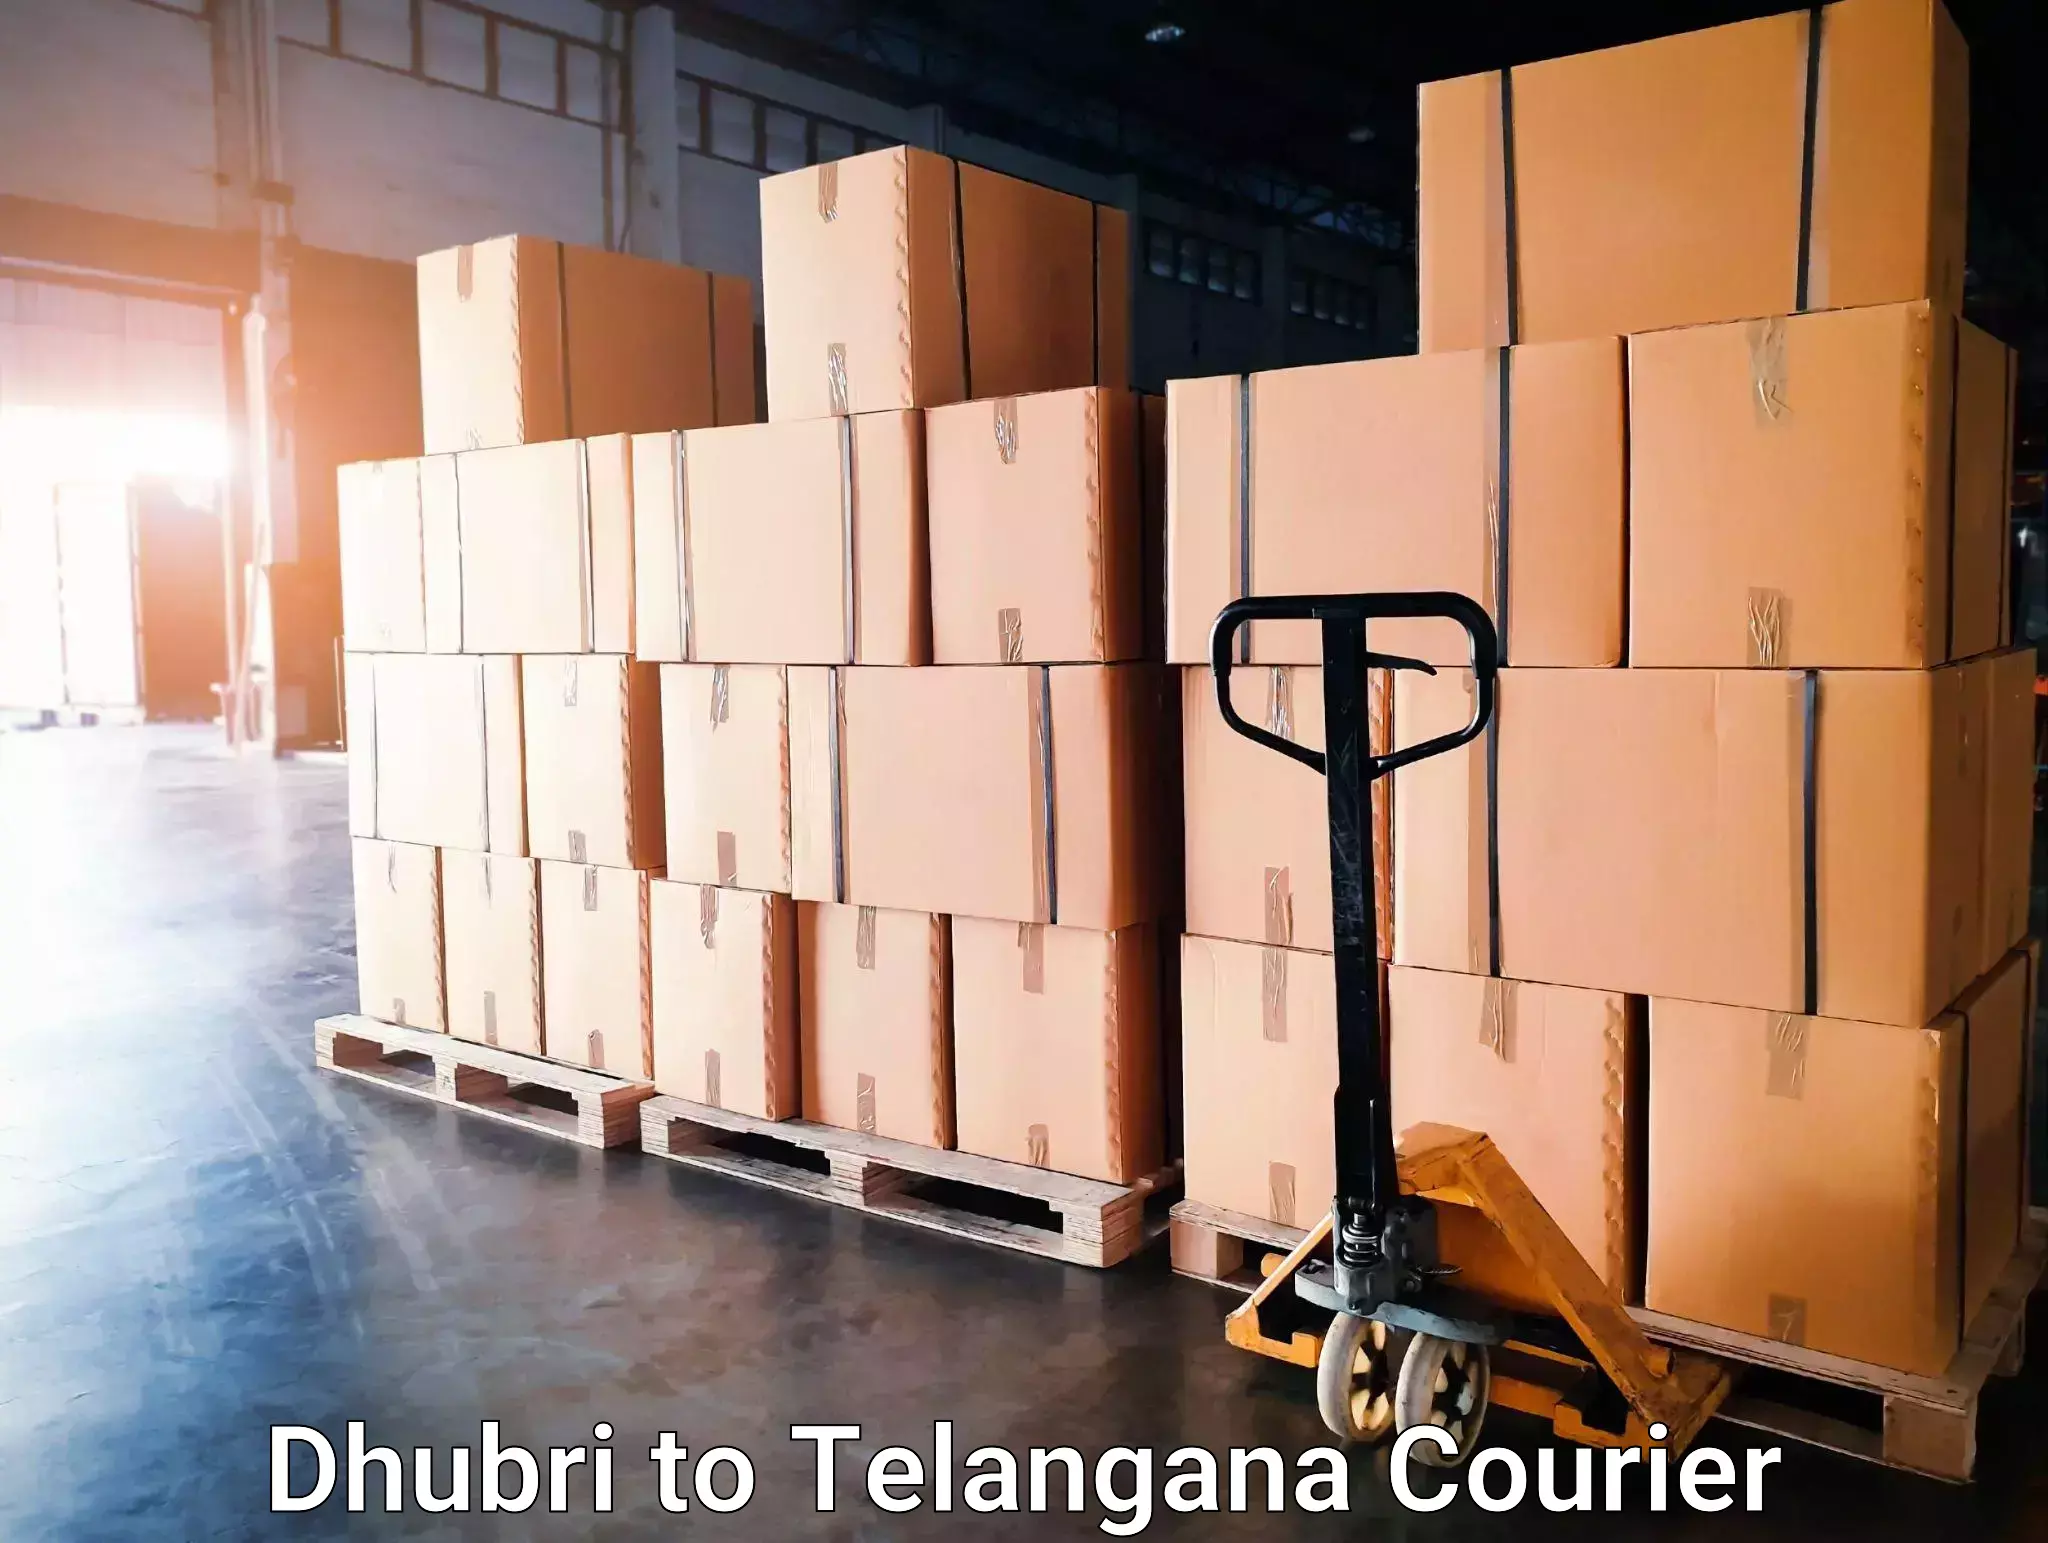 State-of-the-art courier technology Dhubri to Rayaparthi